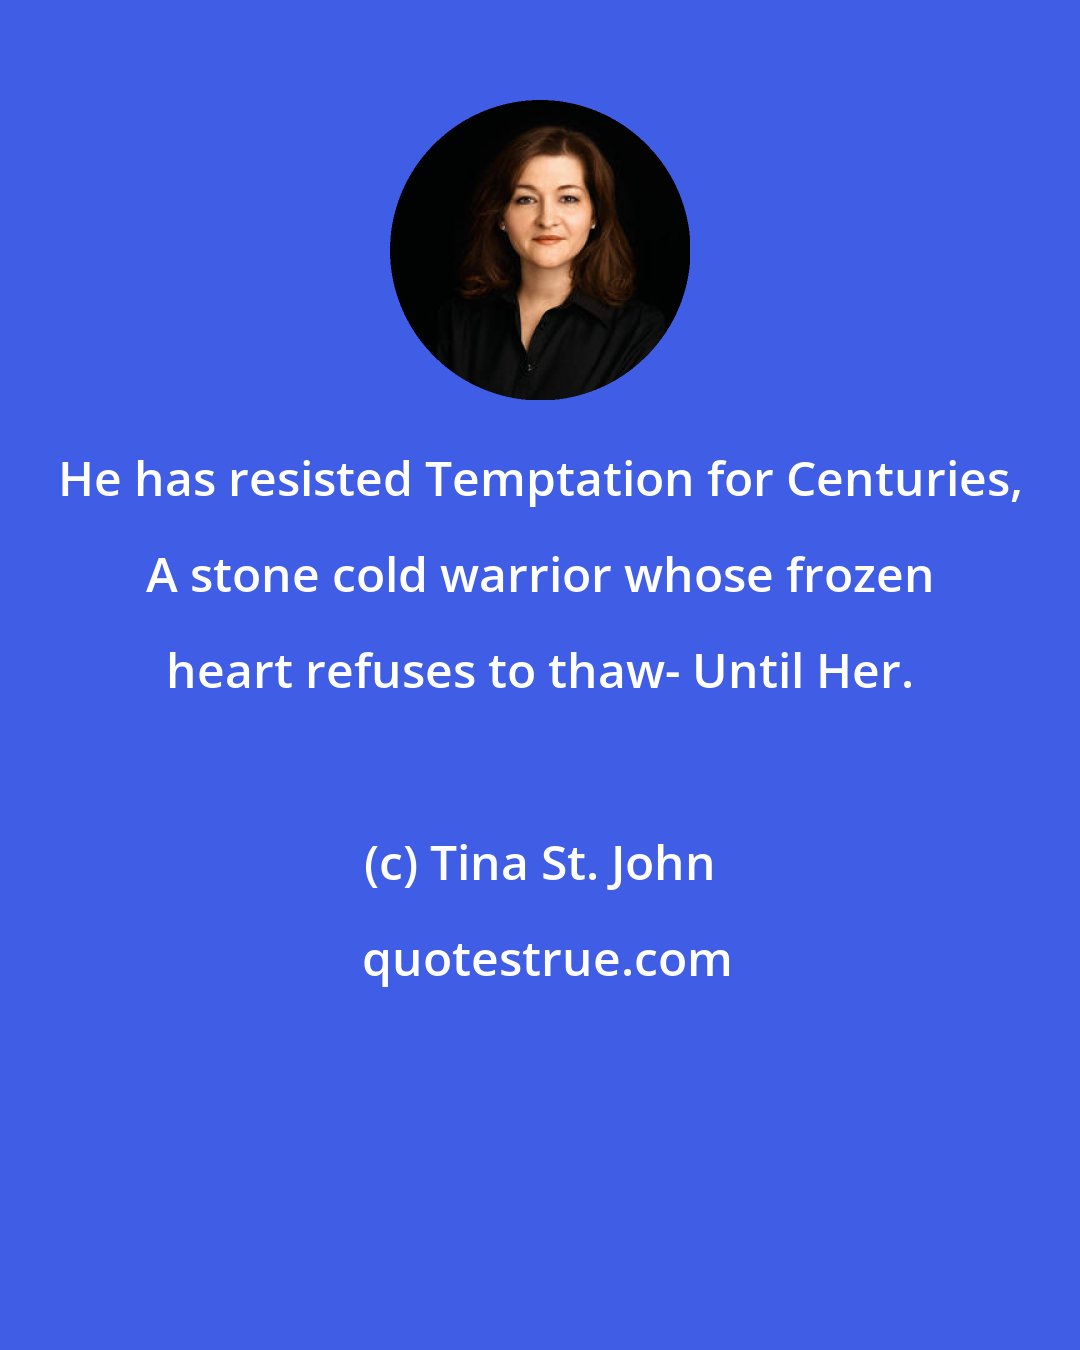 Tina St. John: He has resisted Temptation for Centuries, A stone cold warrior whose frozen heart refuses to thaw- Until Her.